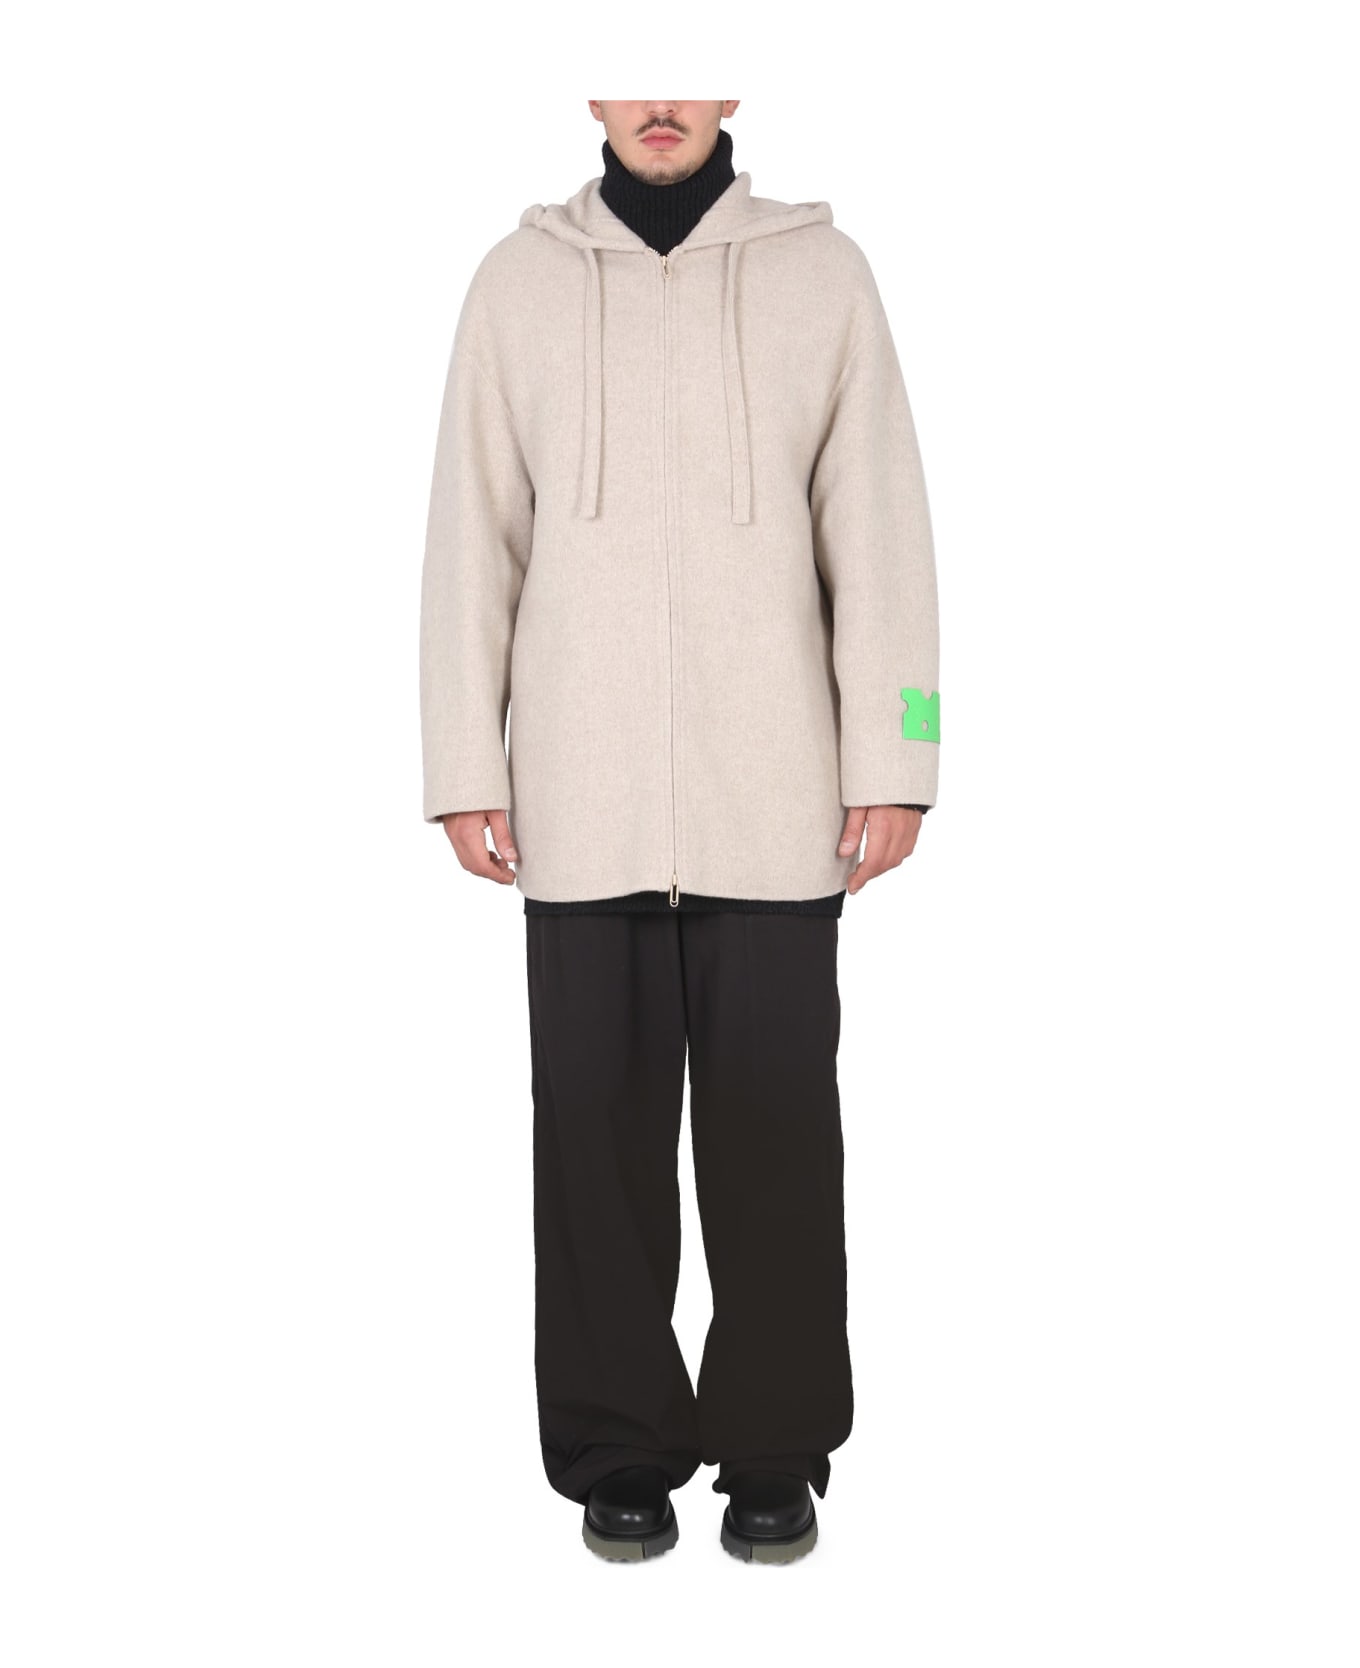 Off-White Hooded Jacket - CIPRIA